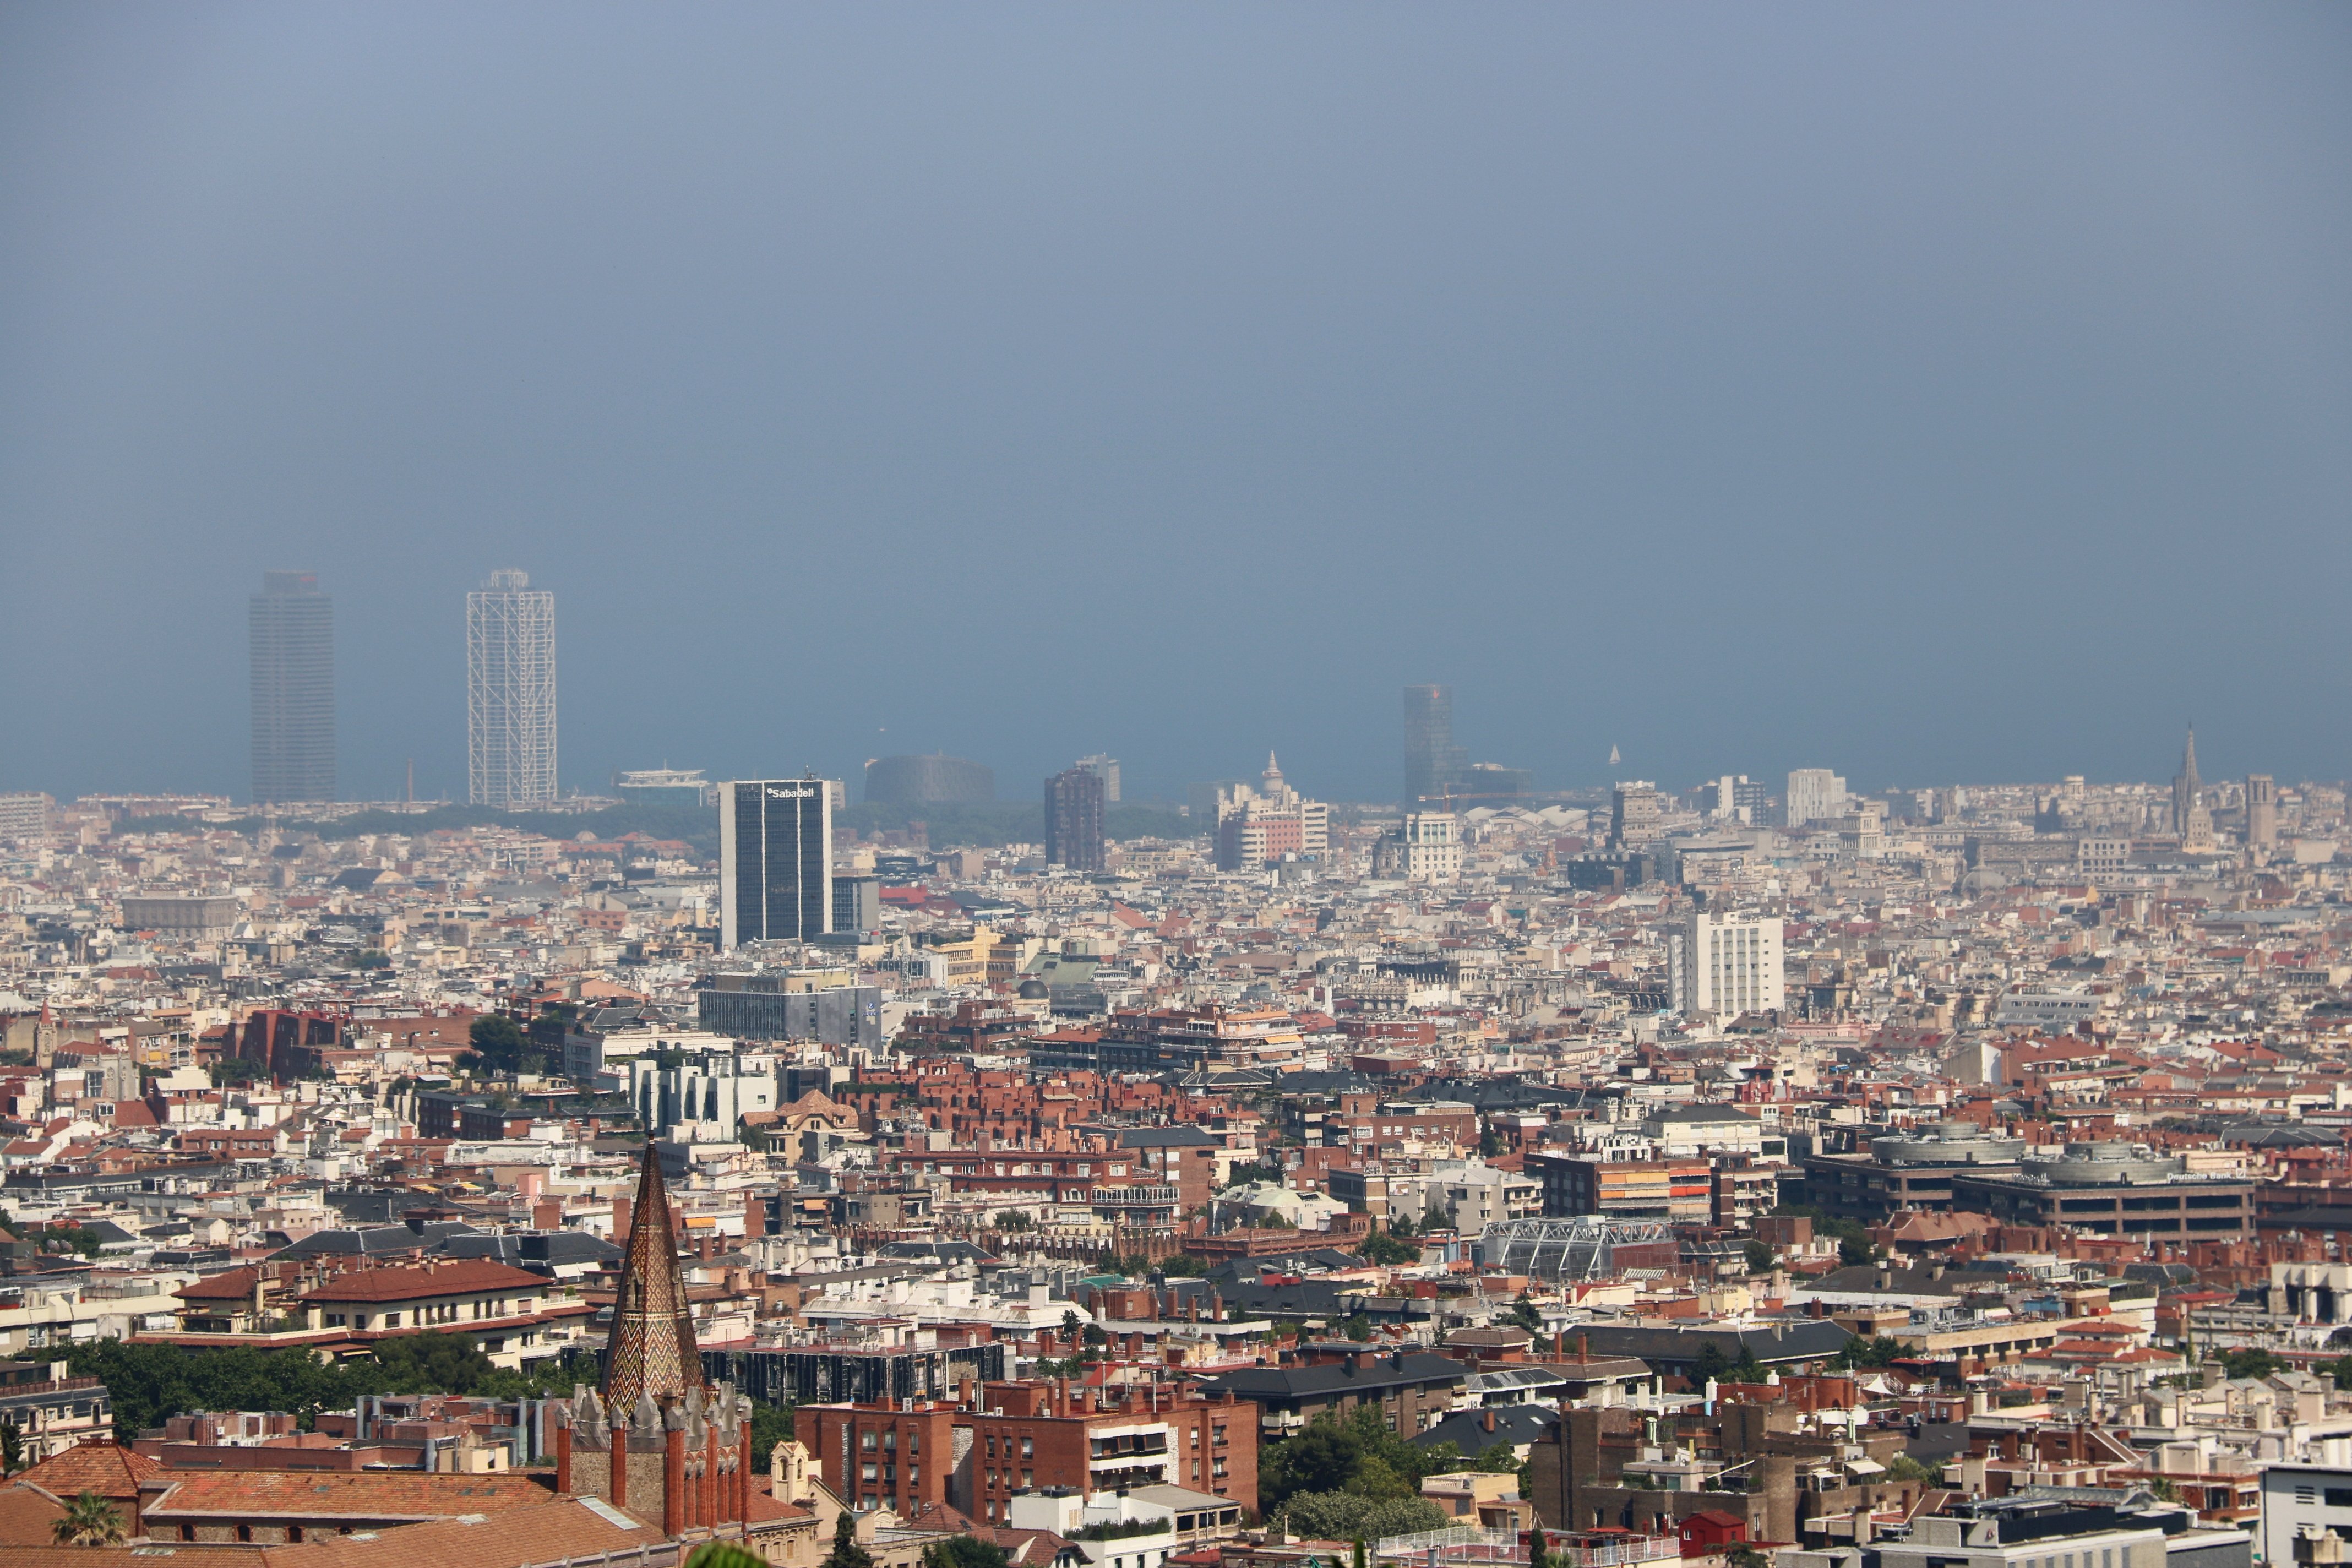 EU court rebukes Spain for Barcelona's "systematic" breaches of air pollution limits